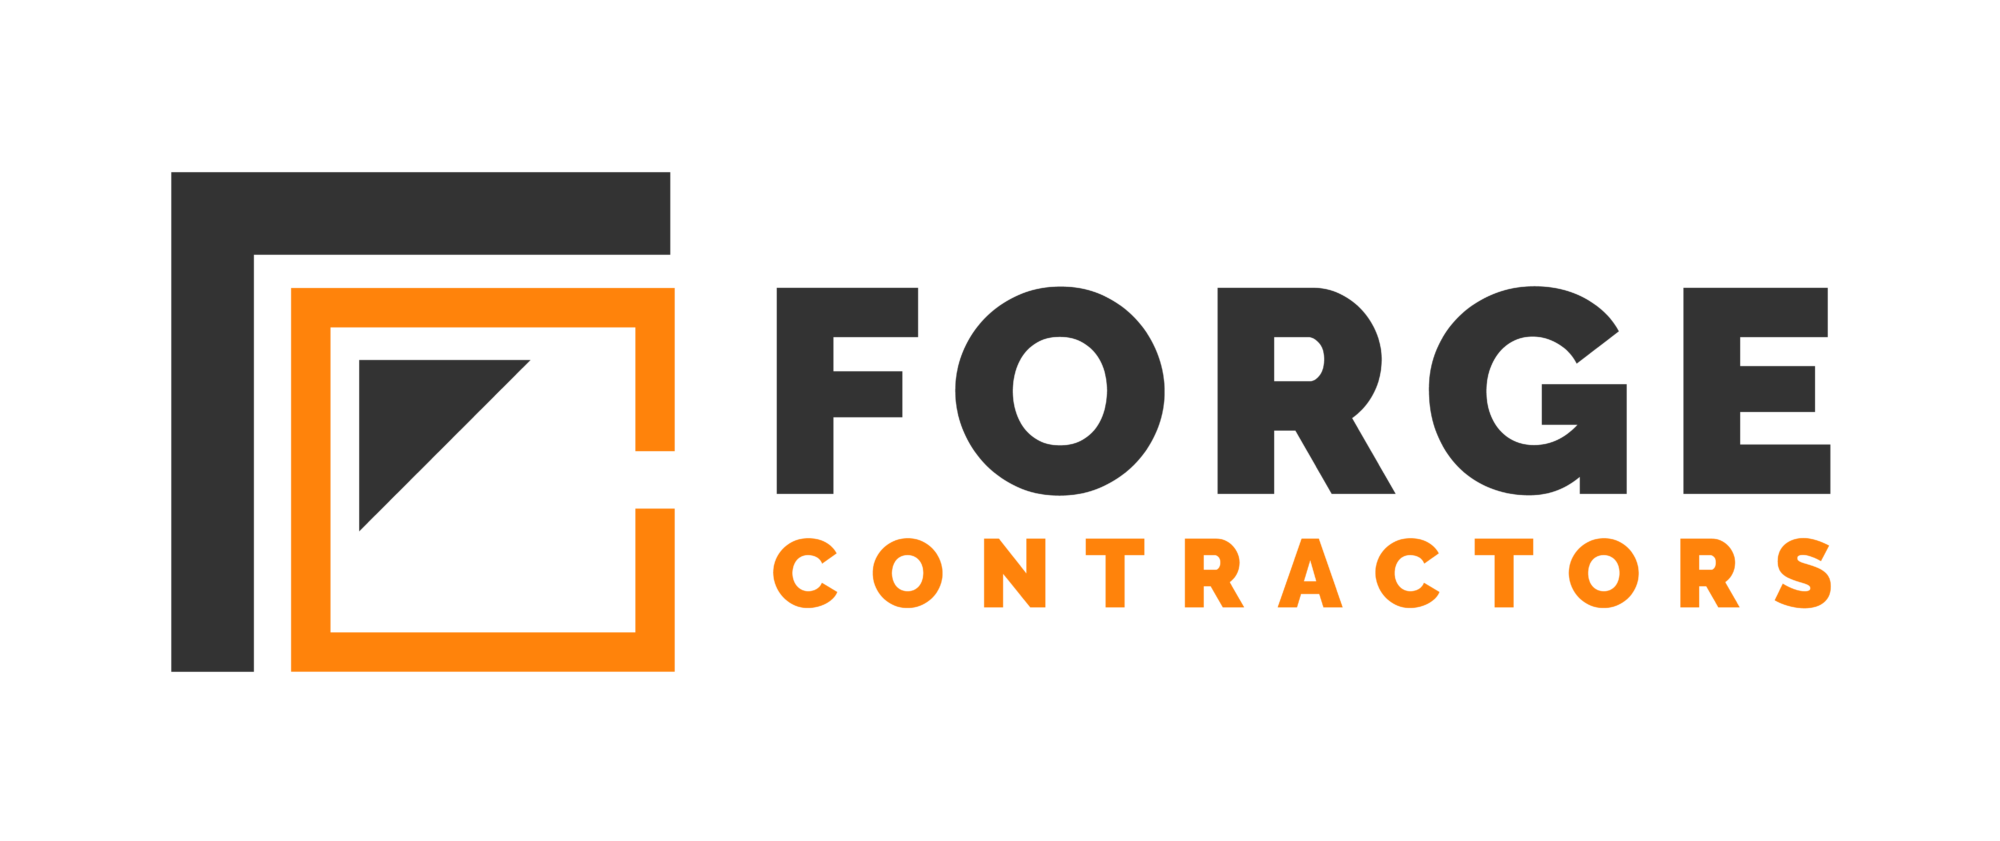 Forge Contractors